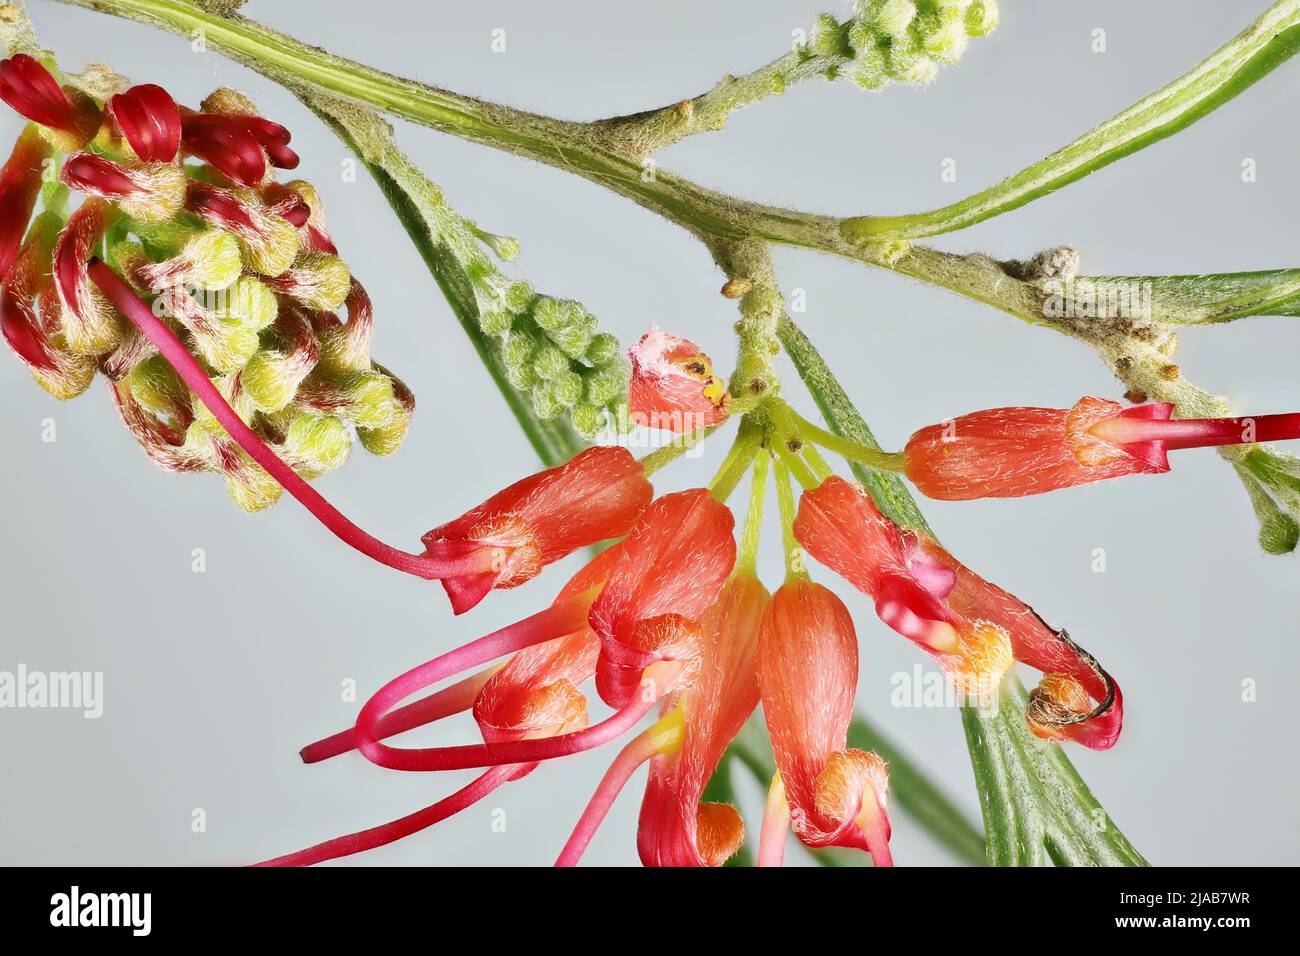 Isolated stem of Grevillea 'Winpara Gem' flowers and buds. Australian native plant. Stock Photo